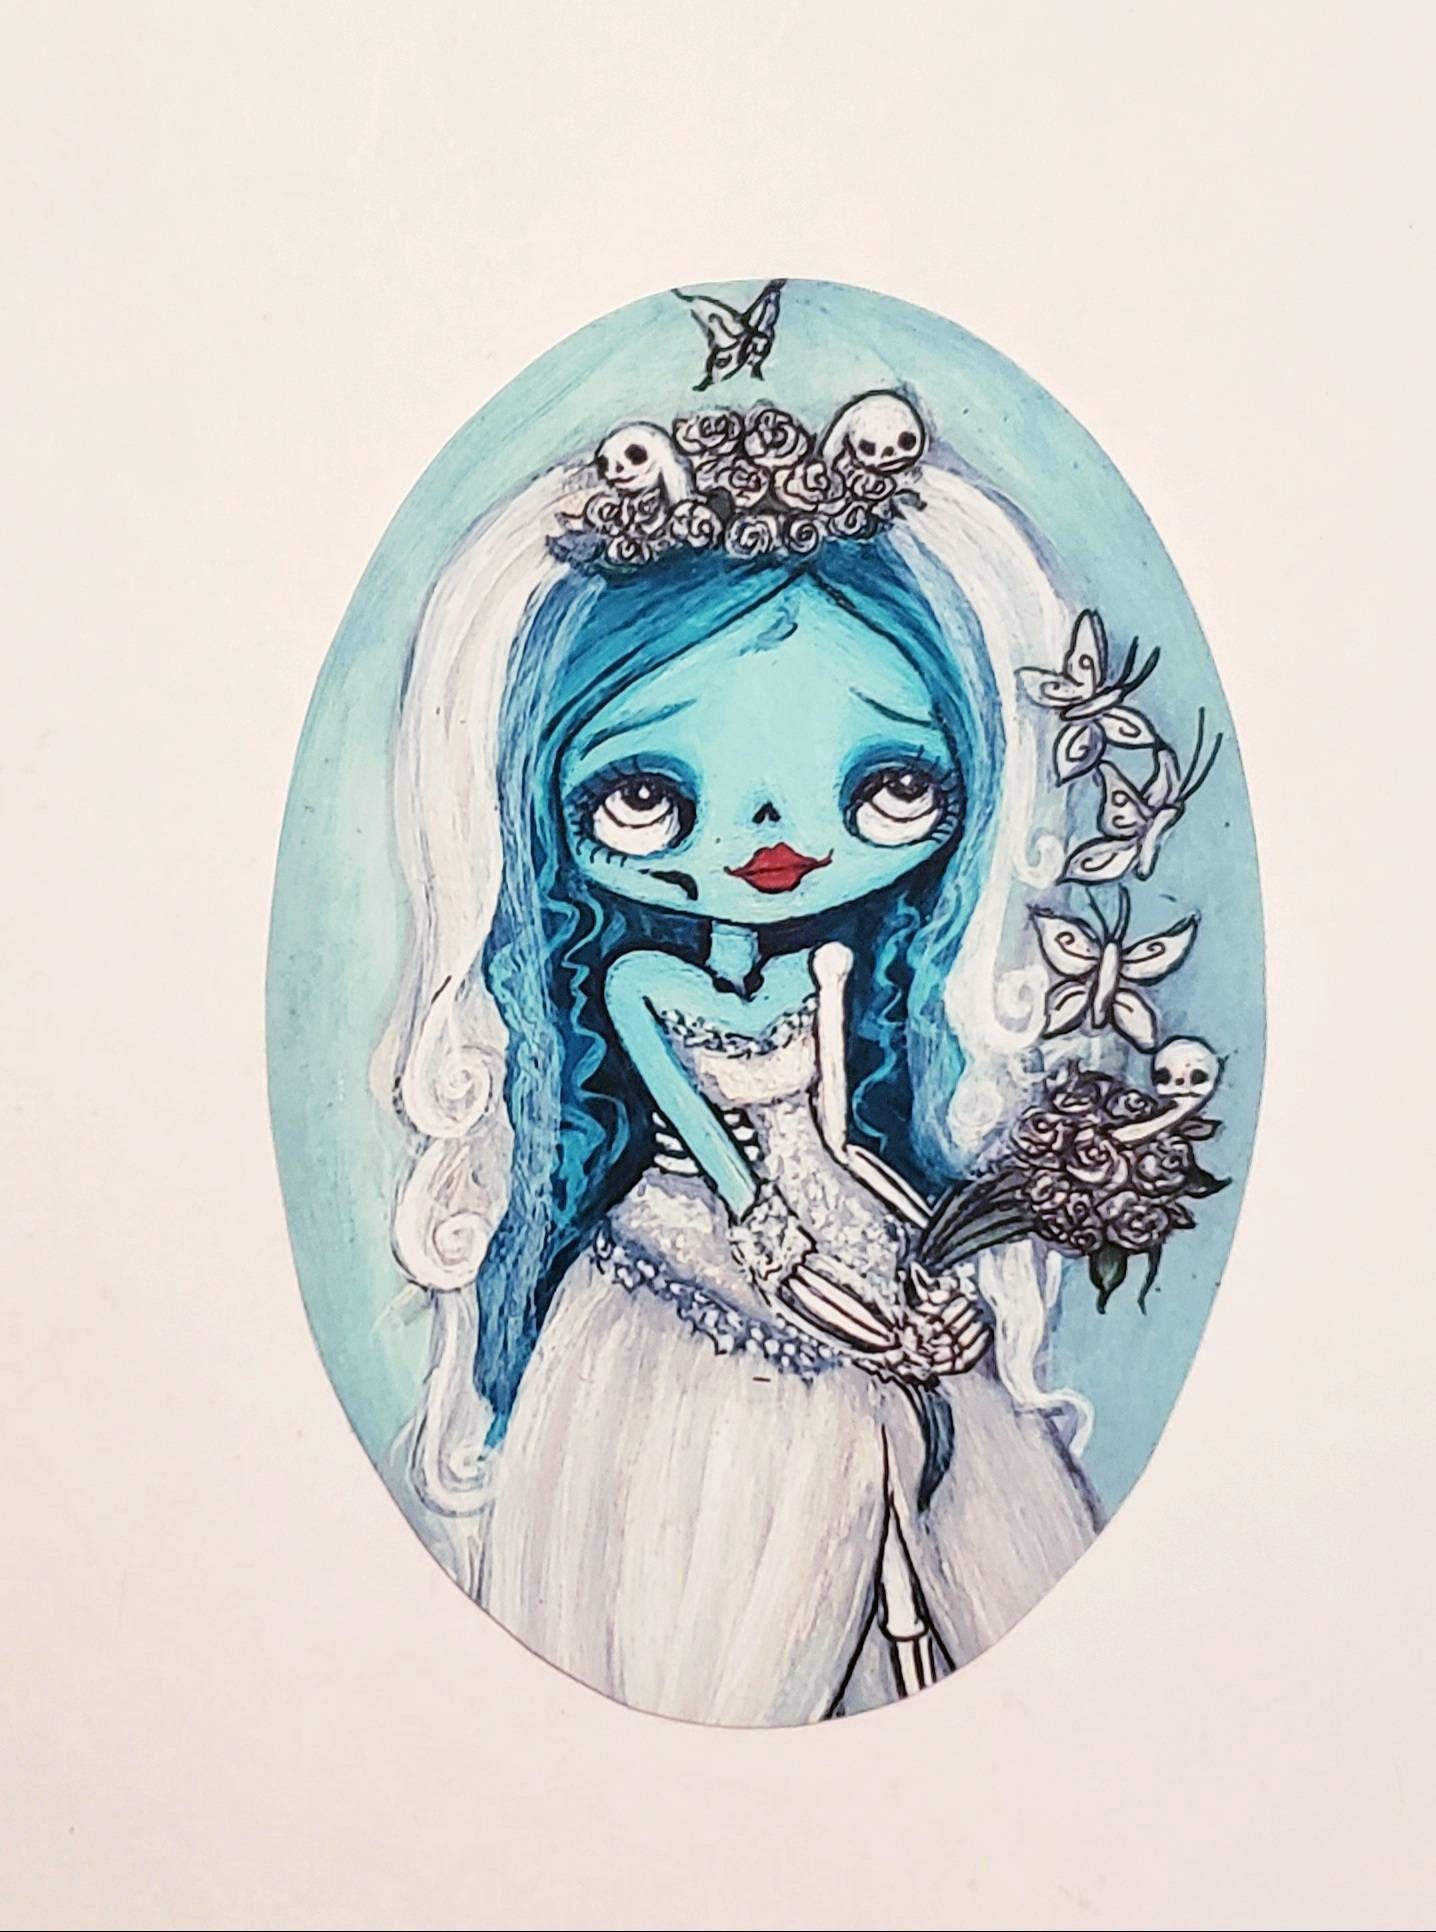 Tattoo uploaded by Alex Wikoff  The Corpse Bride via instagram  keelyrutherford halloween corpsebride dead TimBurton color  butterflies cute KeelyRutherford  Tattoodo